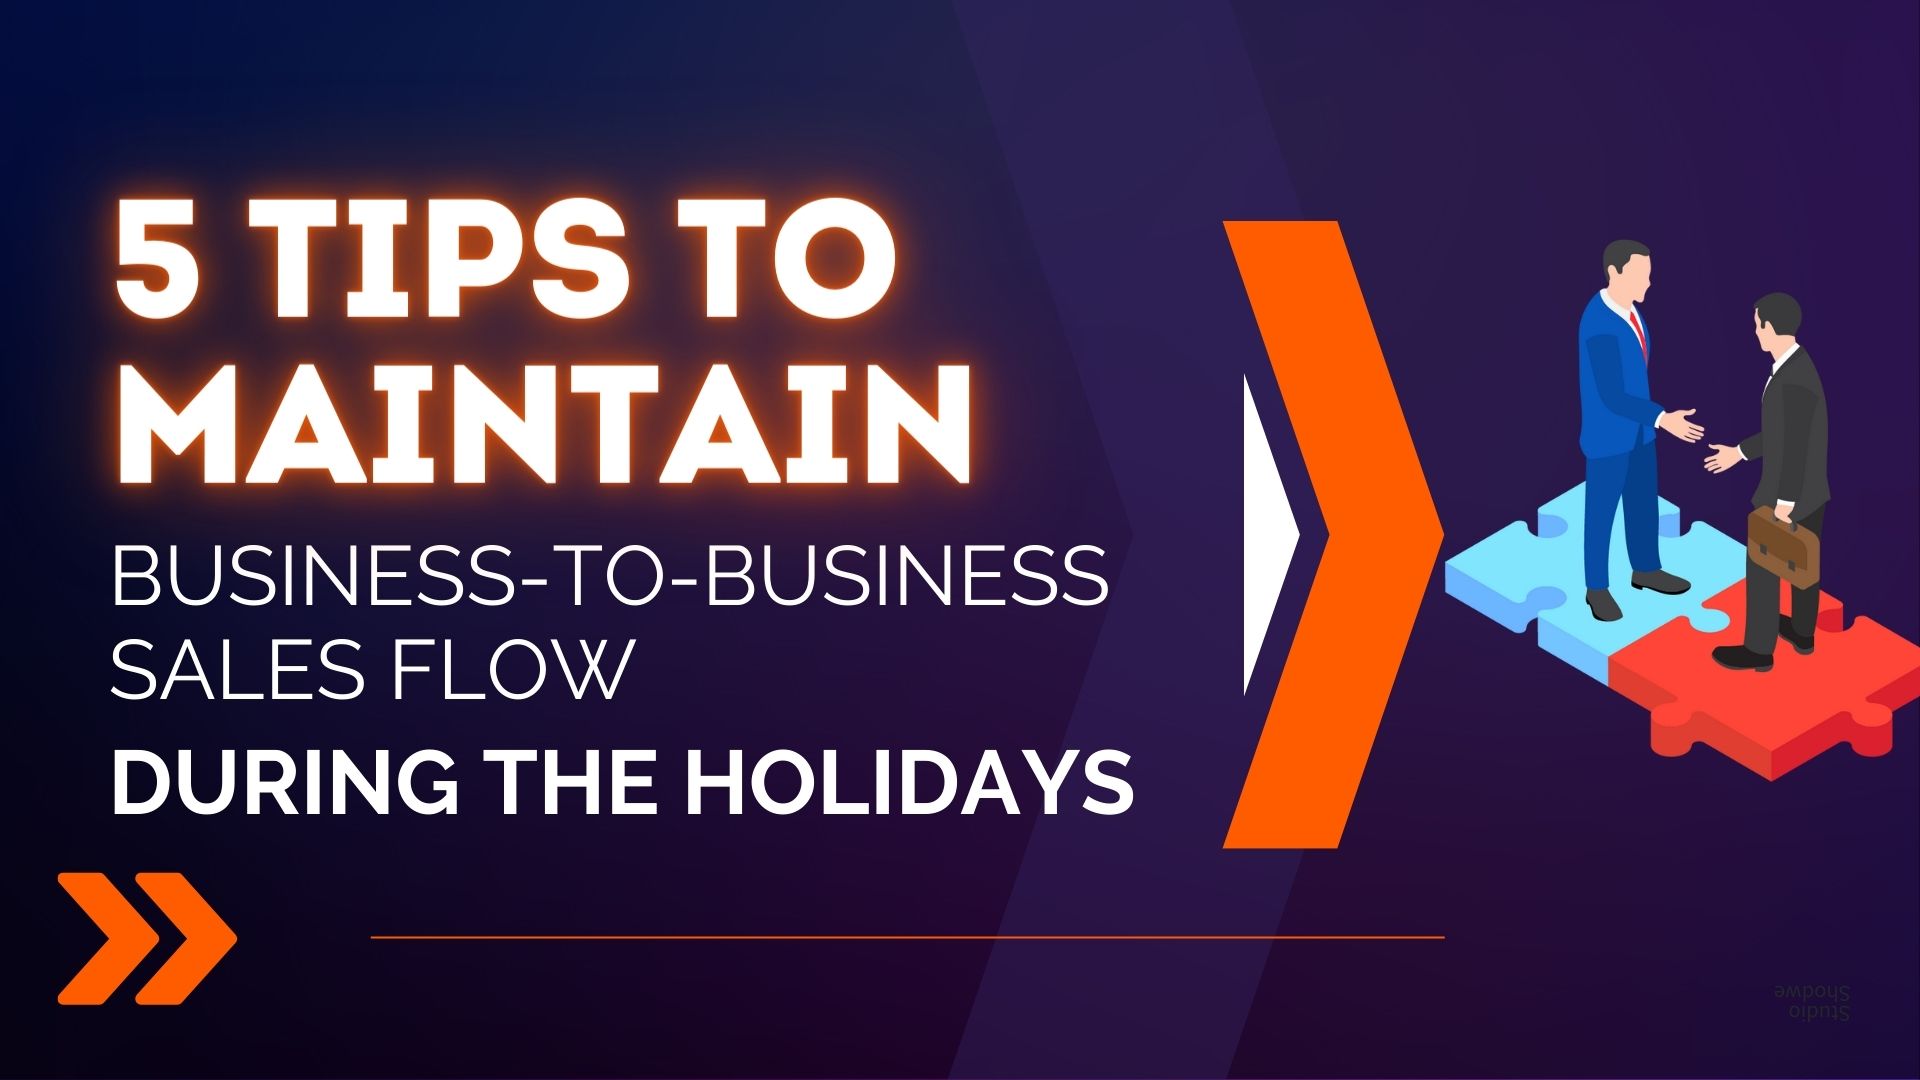 5 Tips to Maintain Business-to-Business Sales Flow During the Holidays